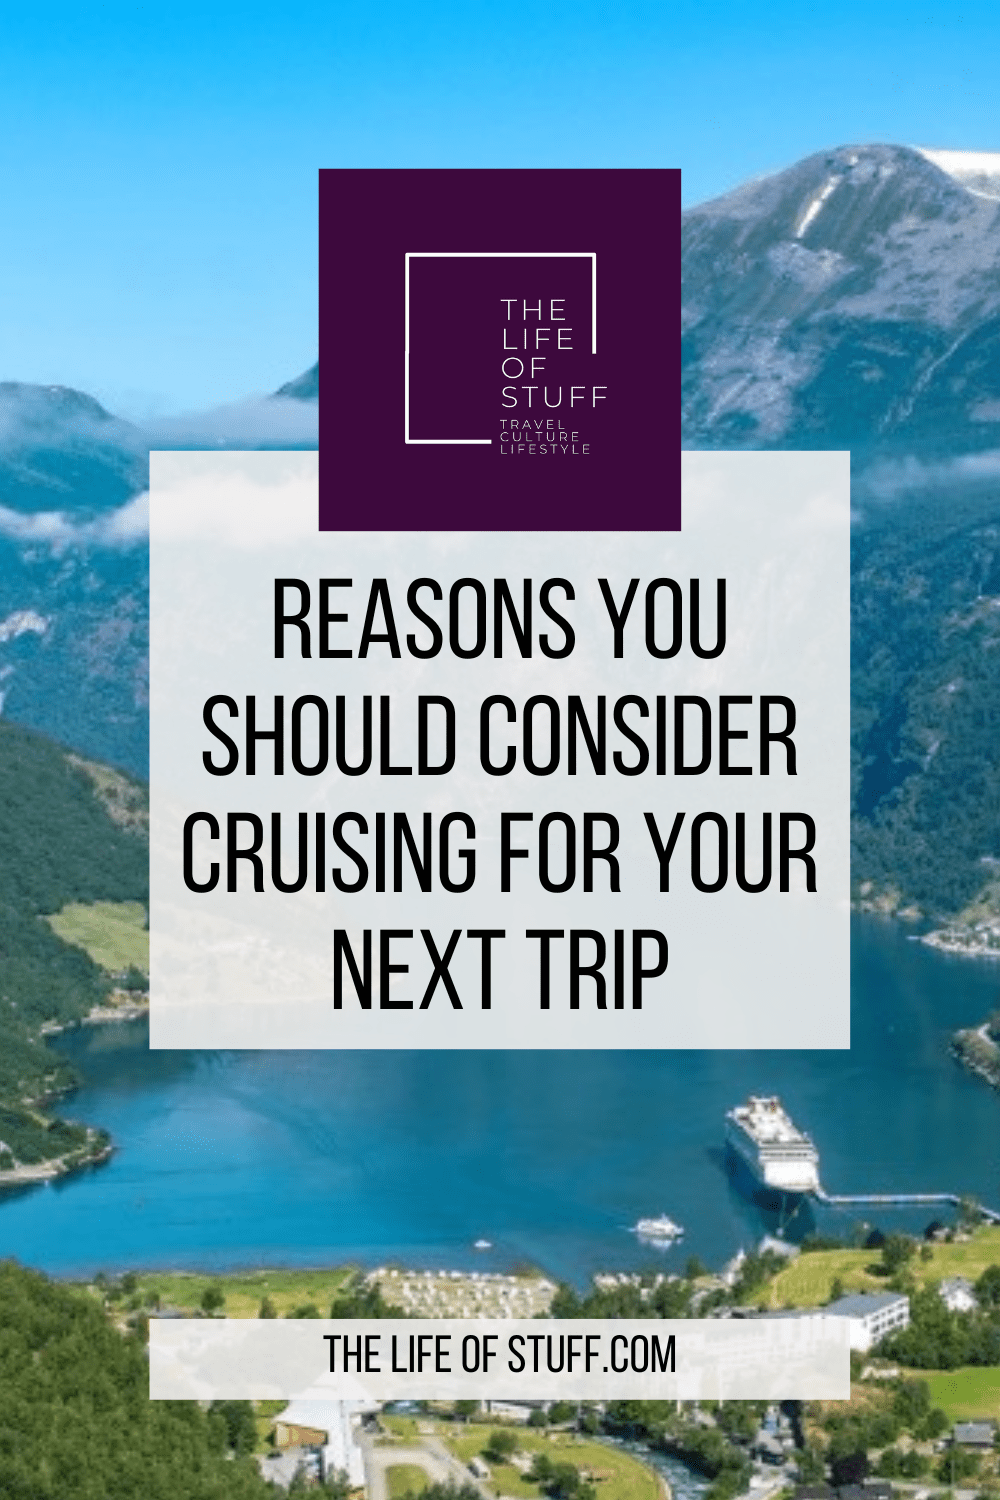 Reasons You Should Consider Cruising For Your Next Trip on The Life of Stuff